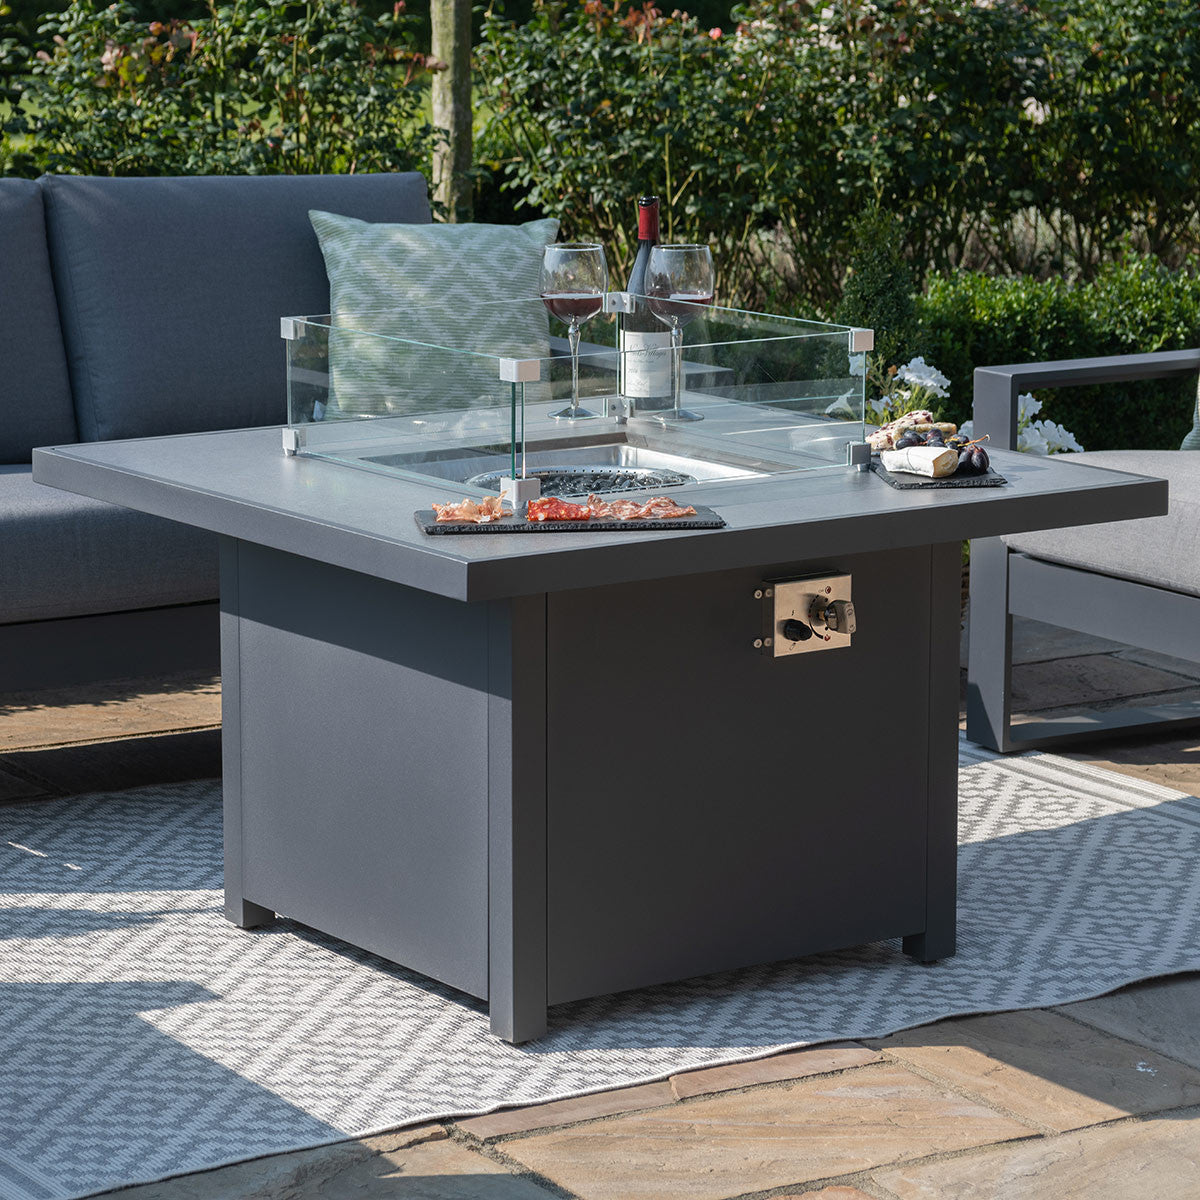 Amalfi Fabric 2 Seat Sofa Set With Square Fire Pit Table